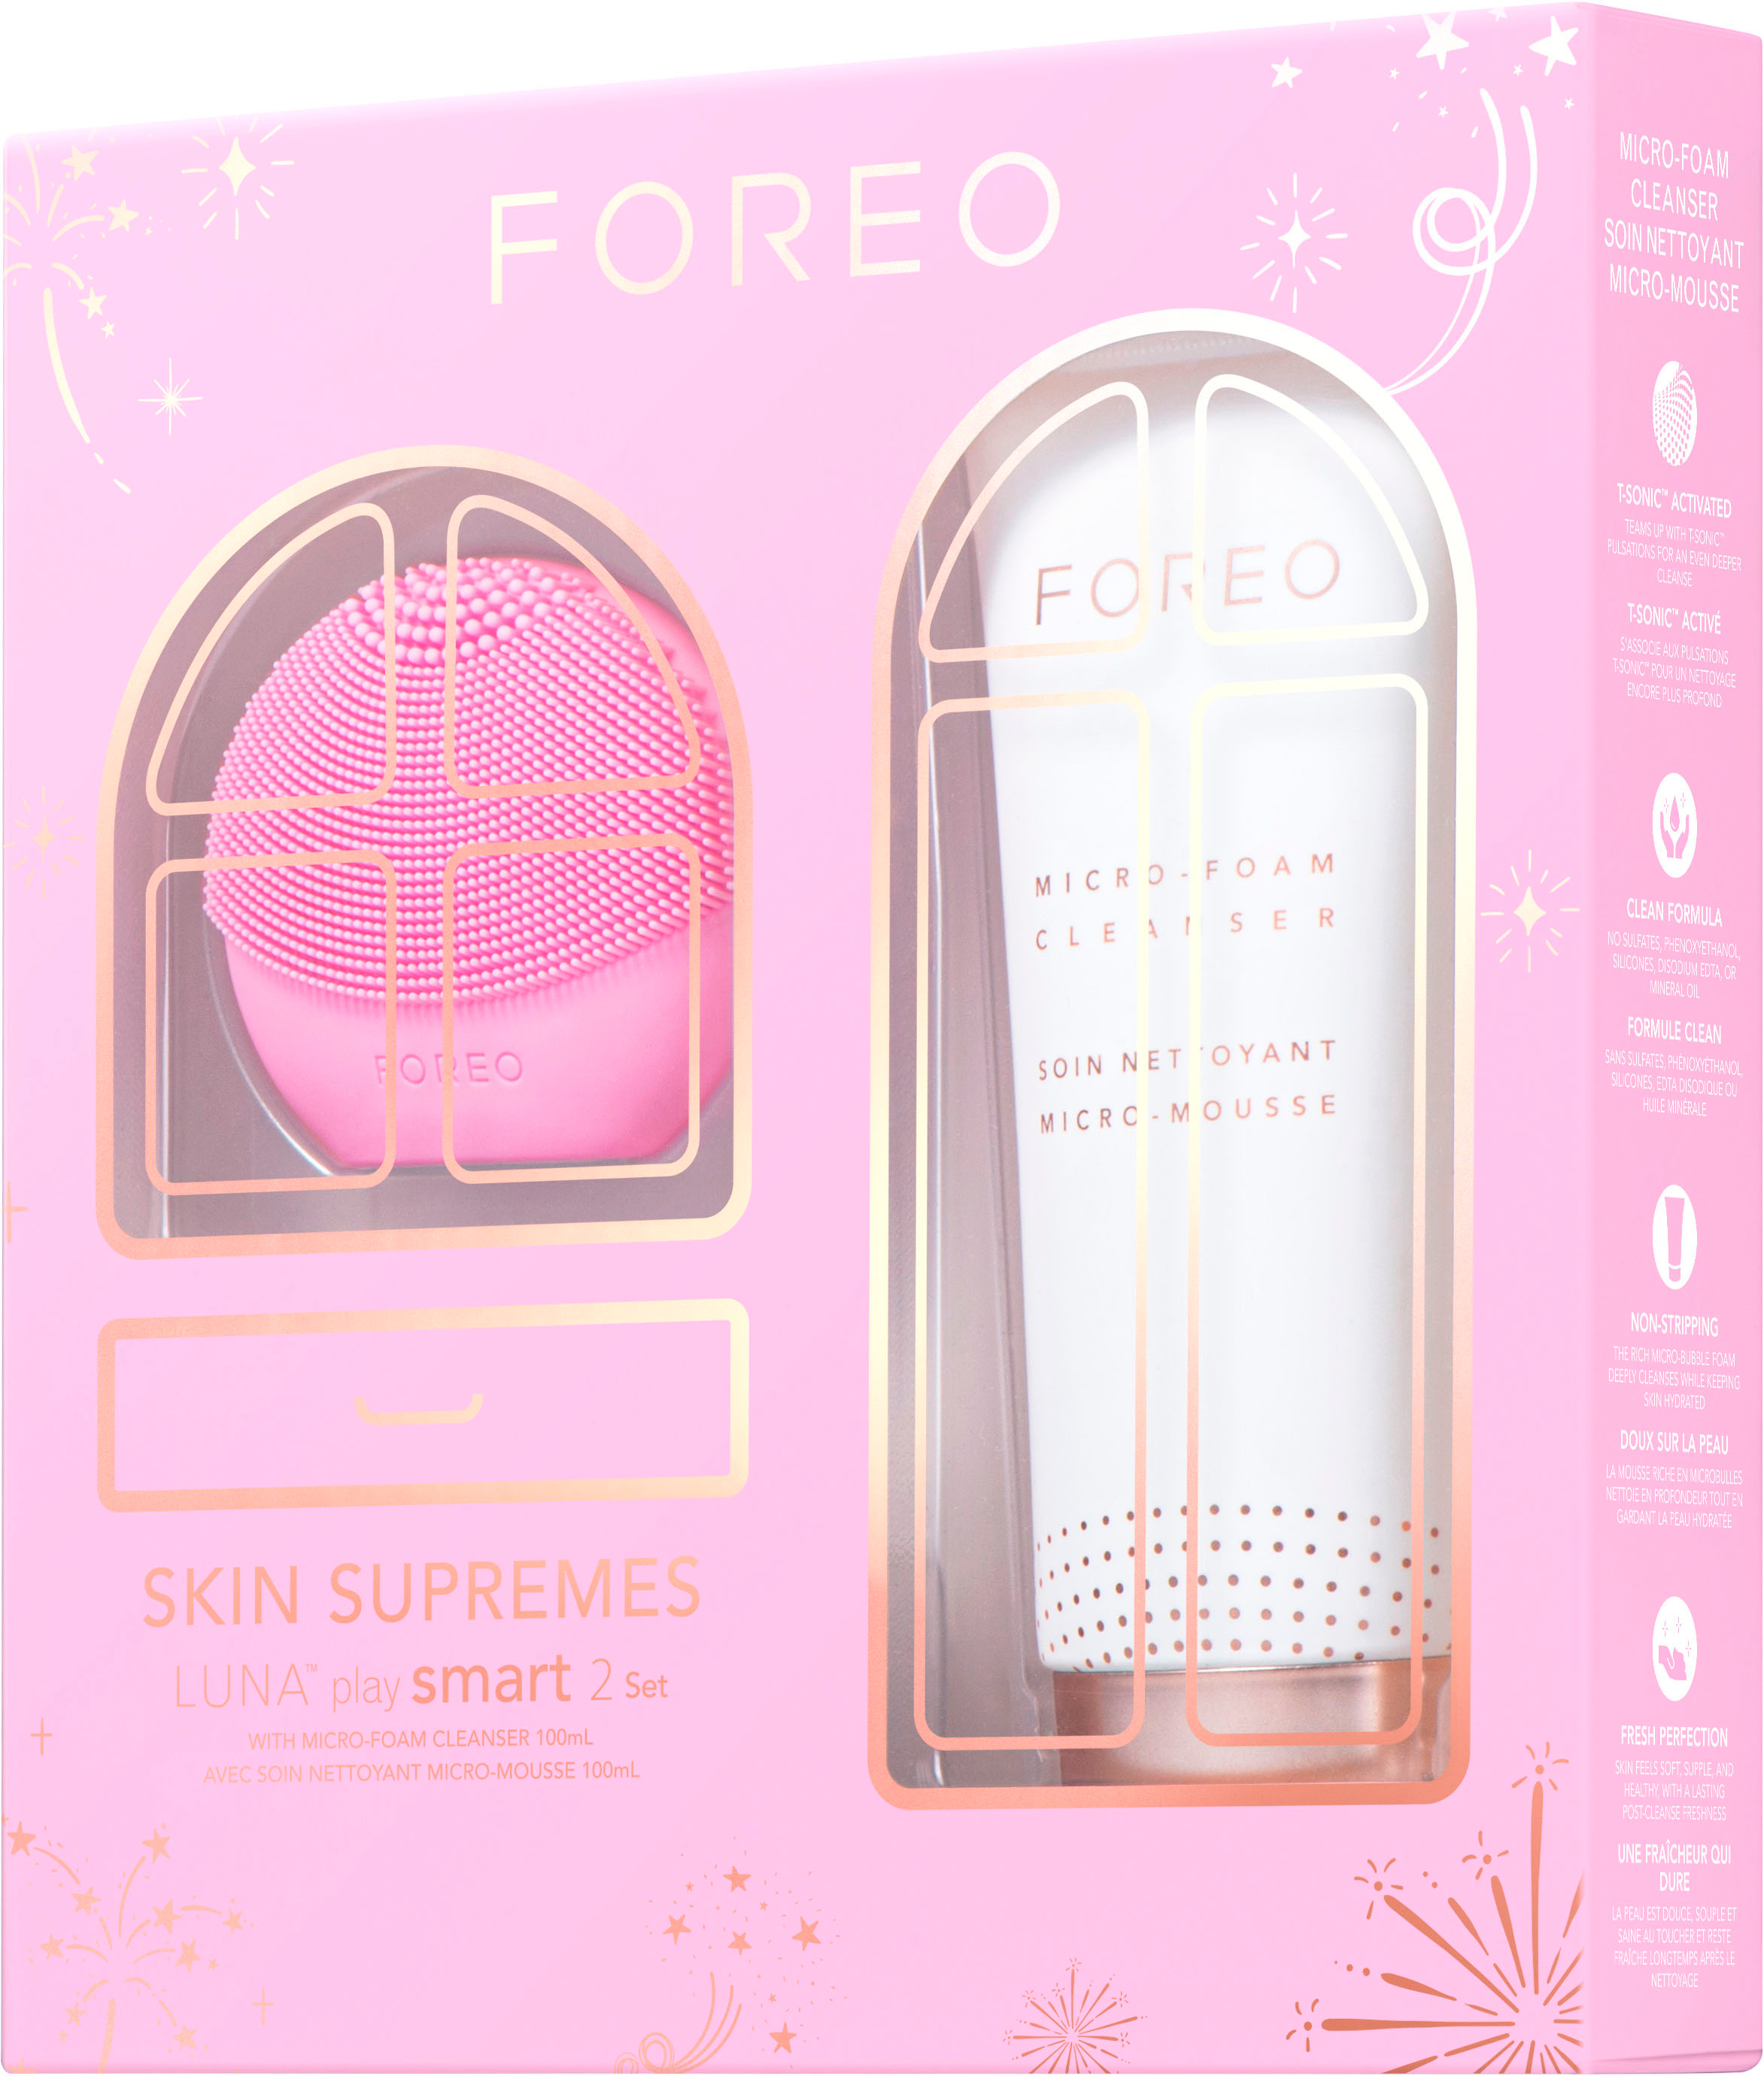 FOREO SKIN SUPREMES Collection: LUNA™ play smart 2 Set F1153 - Best Buy